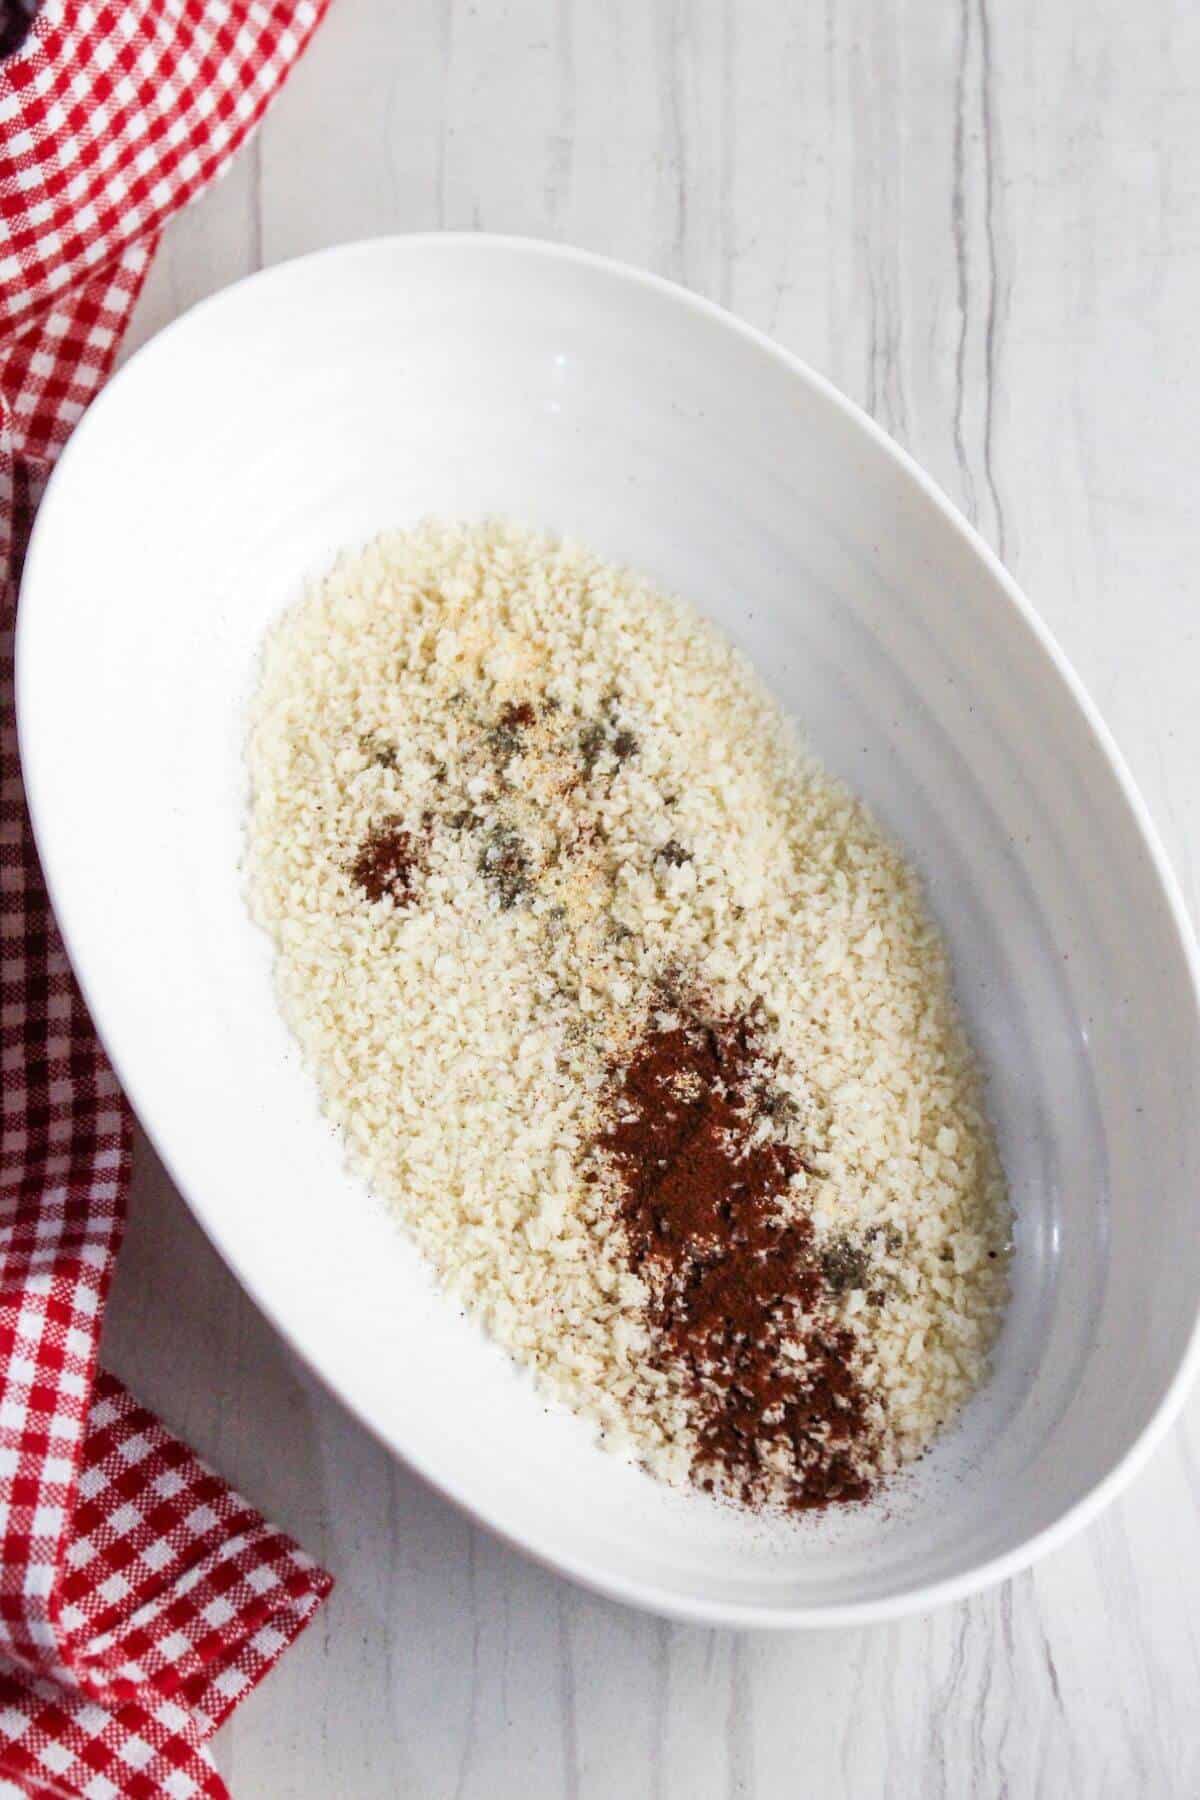 Panko with seasonings in a white bowl with a red and white checkered napkin.